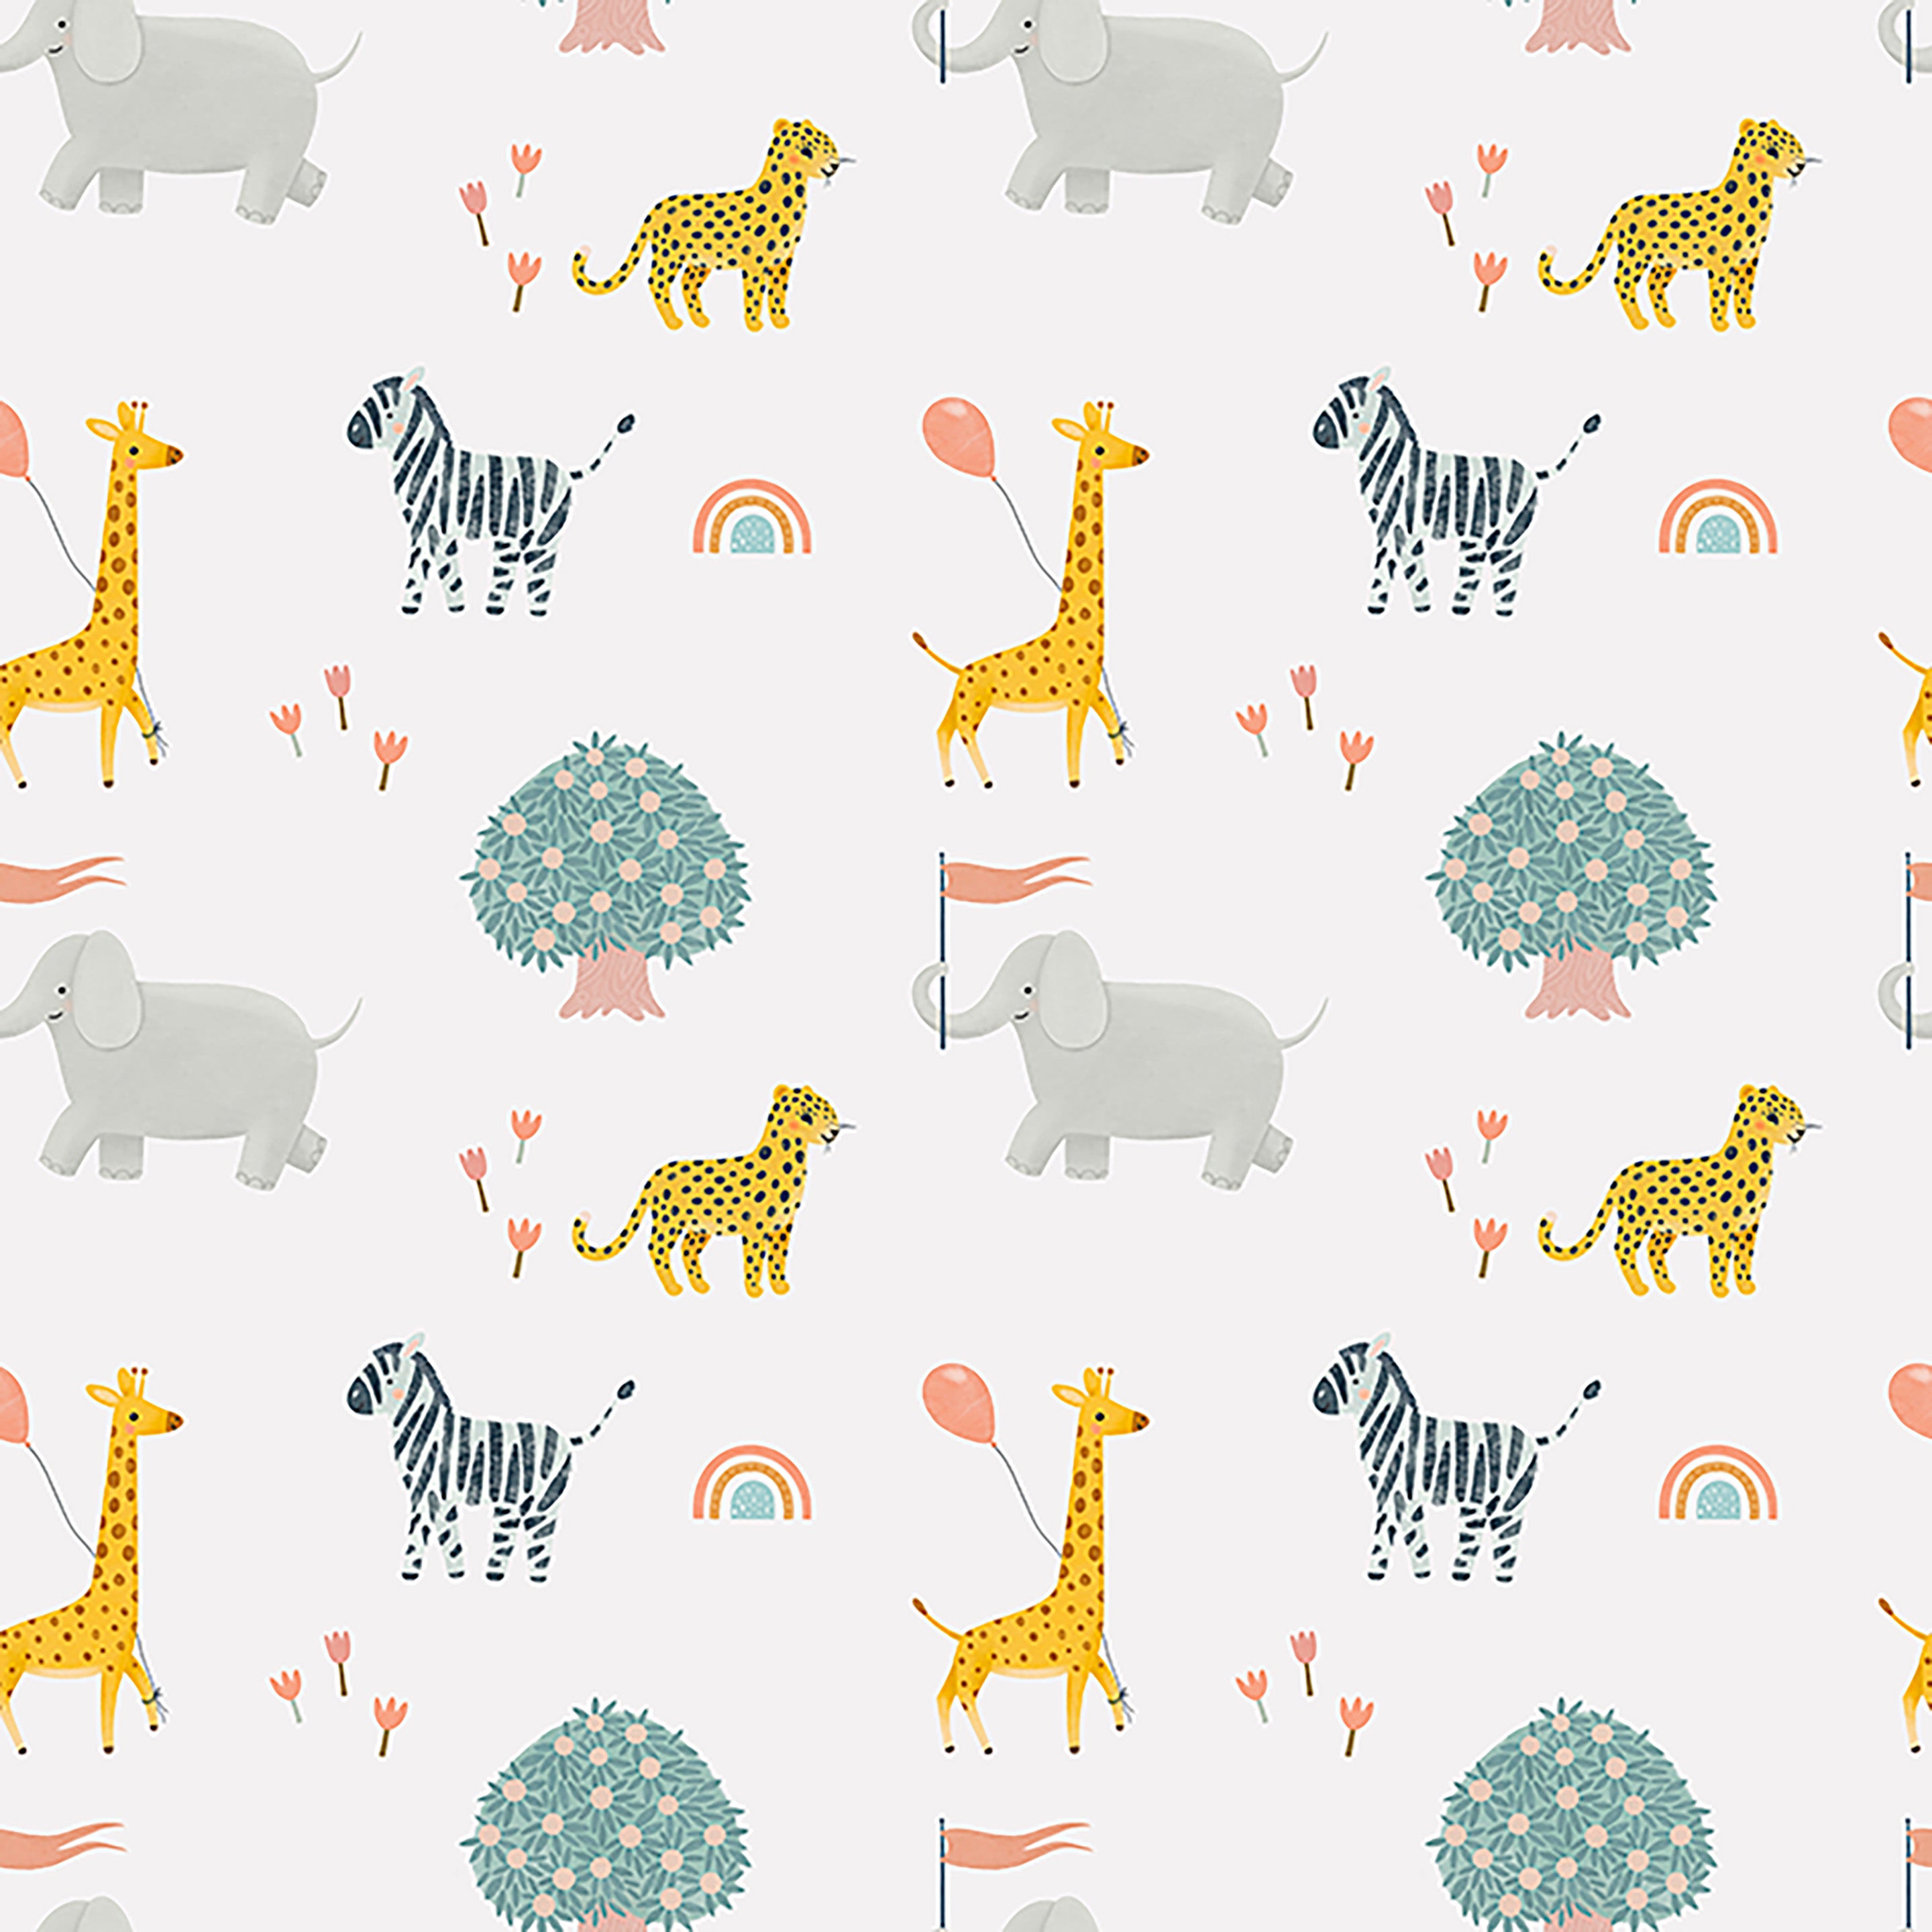 Seamless pattern of Safari Adventure Wallpaper featuring stylized, playful illustrations of elephants, giraffes, zebras, cheetahs, rainbows, and floral elements in a muted color palette on a light background